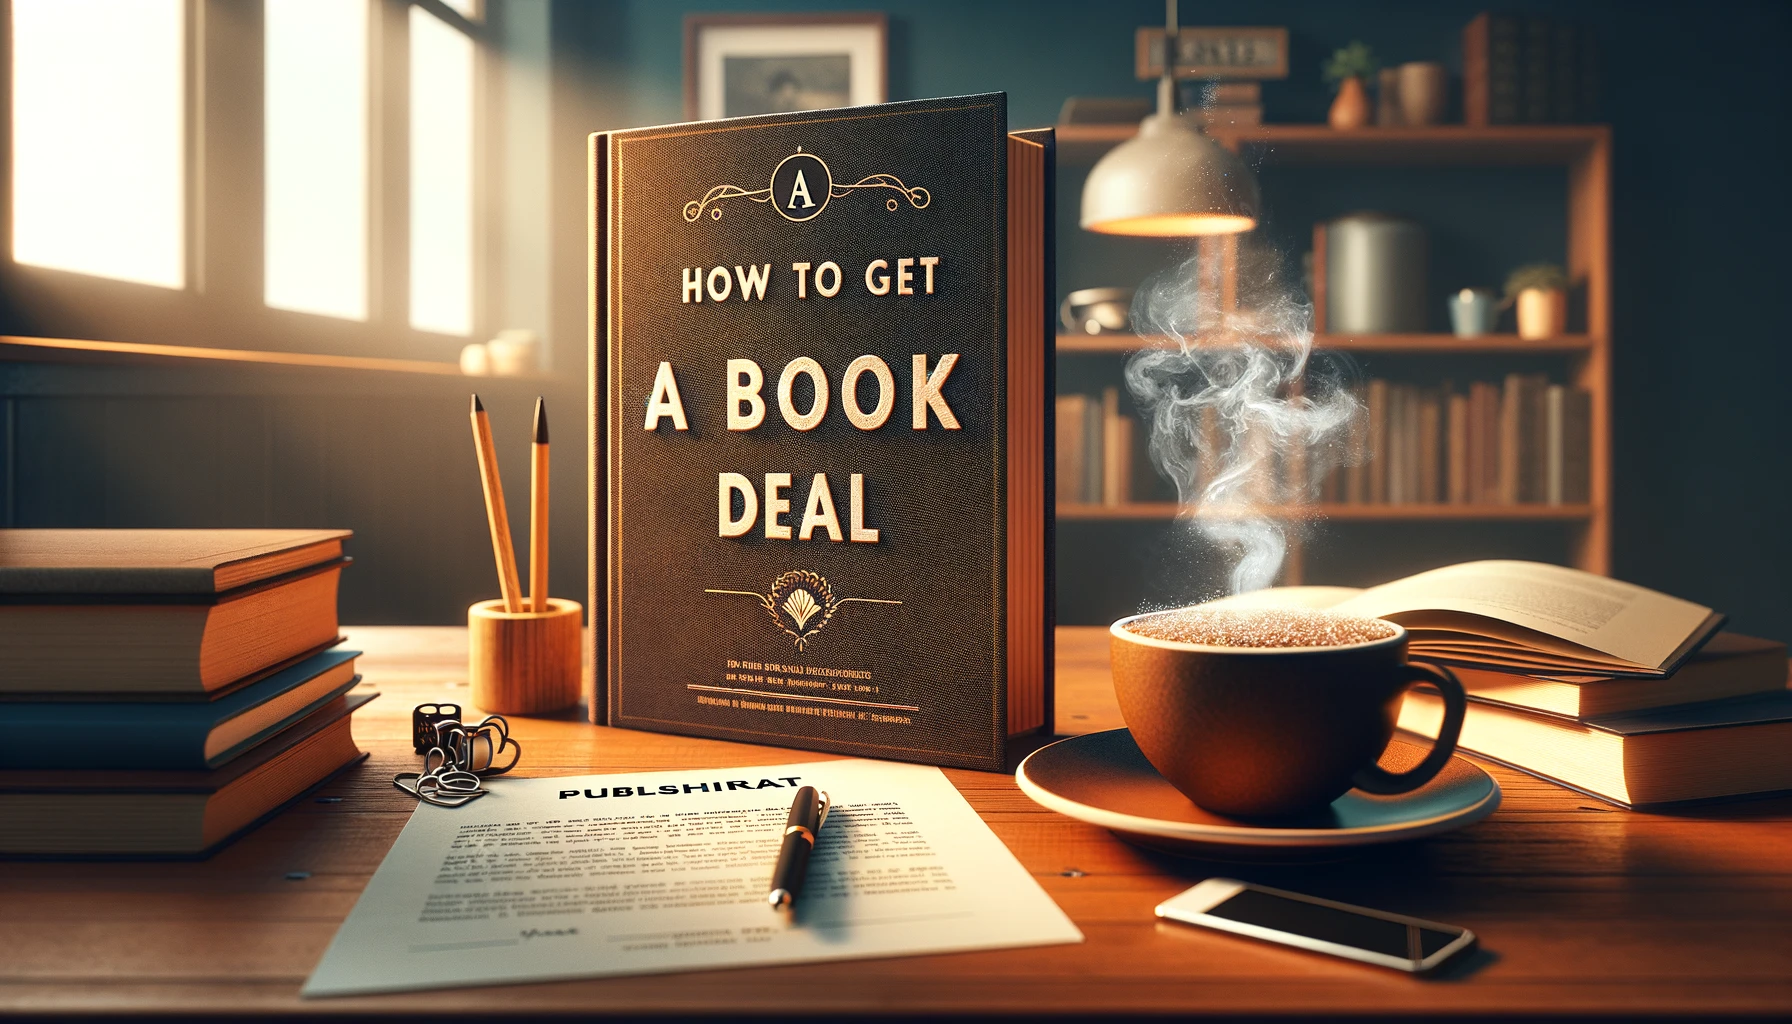 How to Get a Book Deal - Step-by-Step Guide for Authors